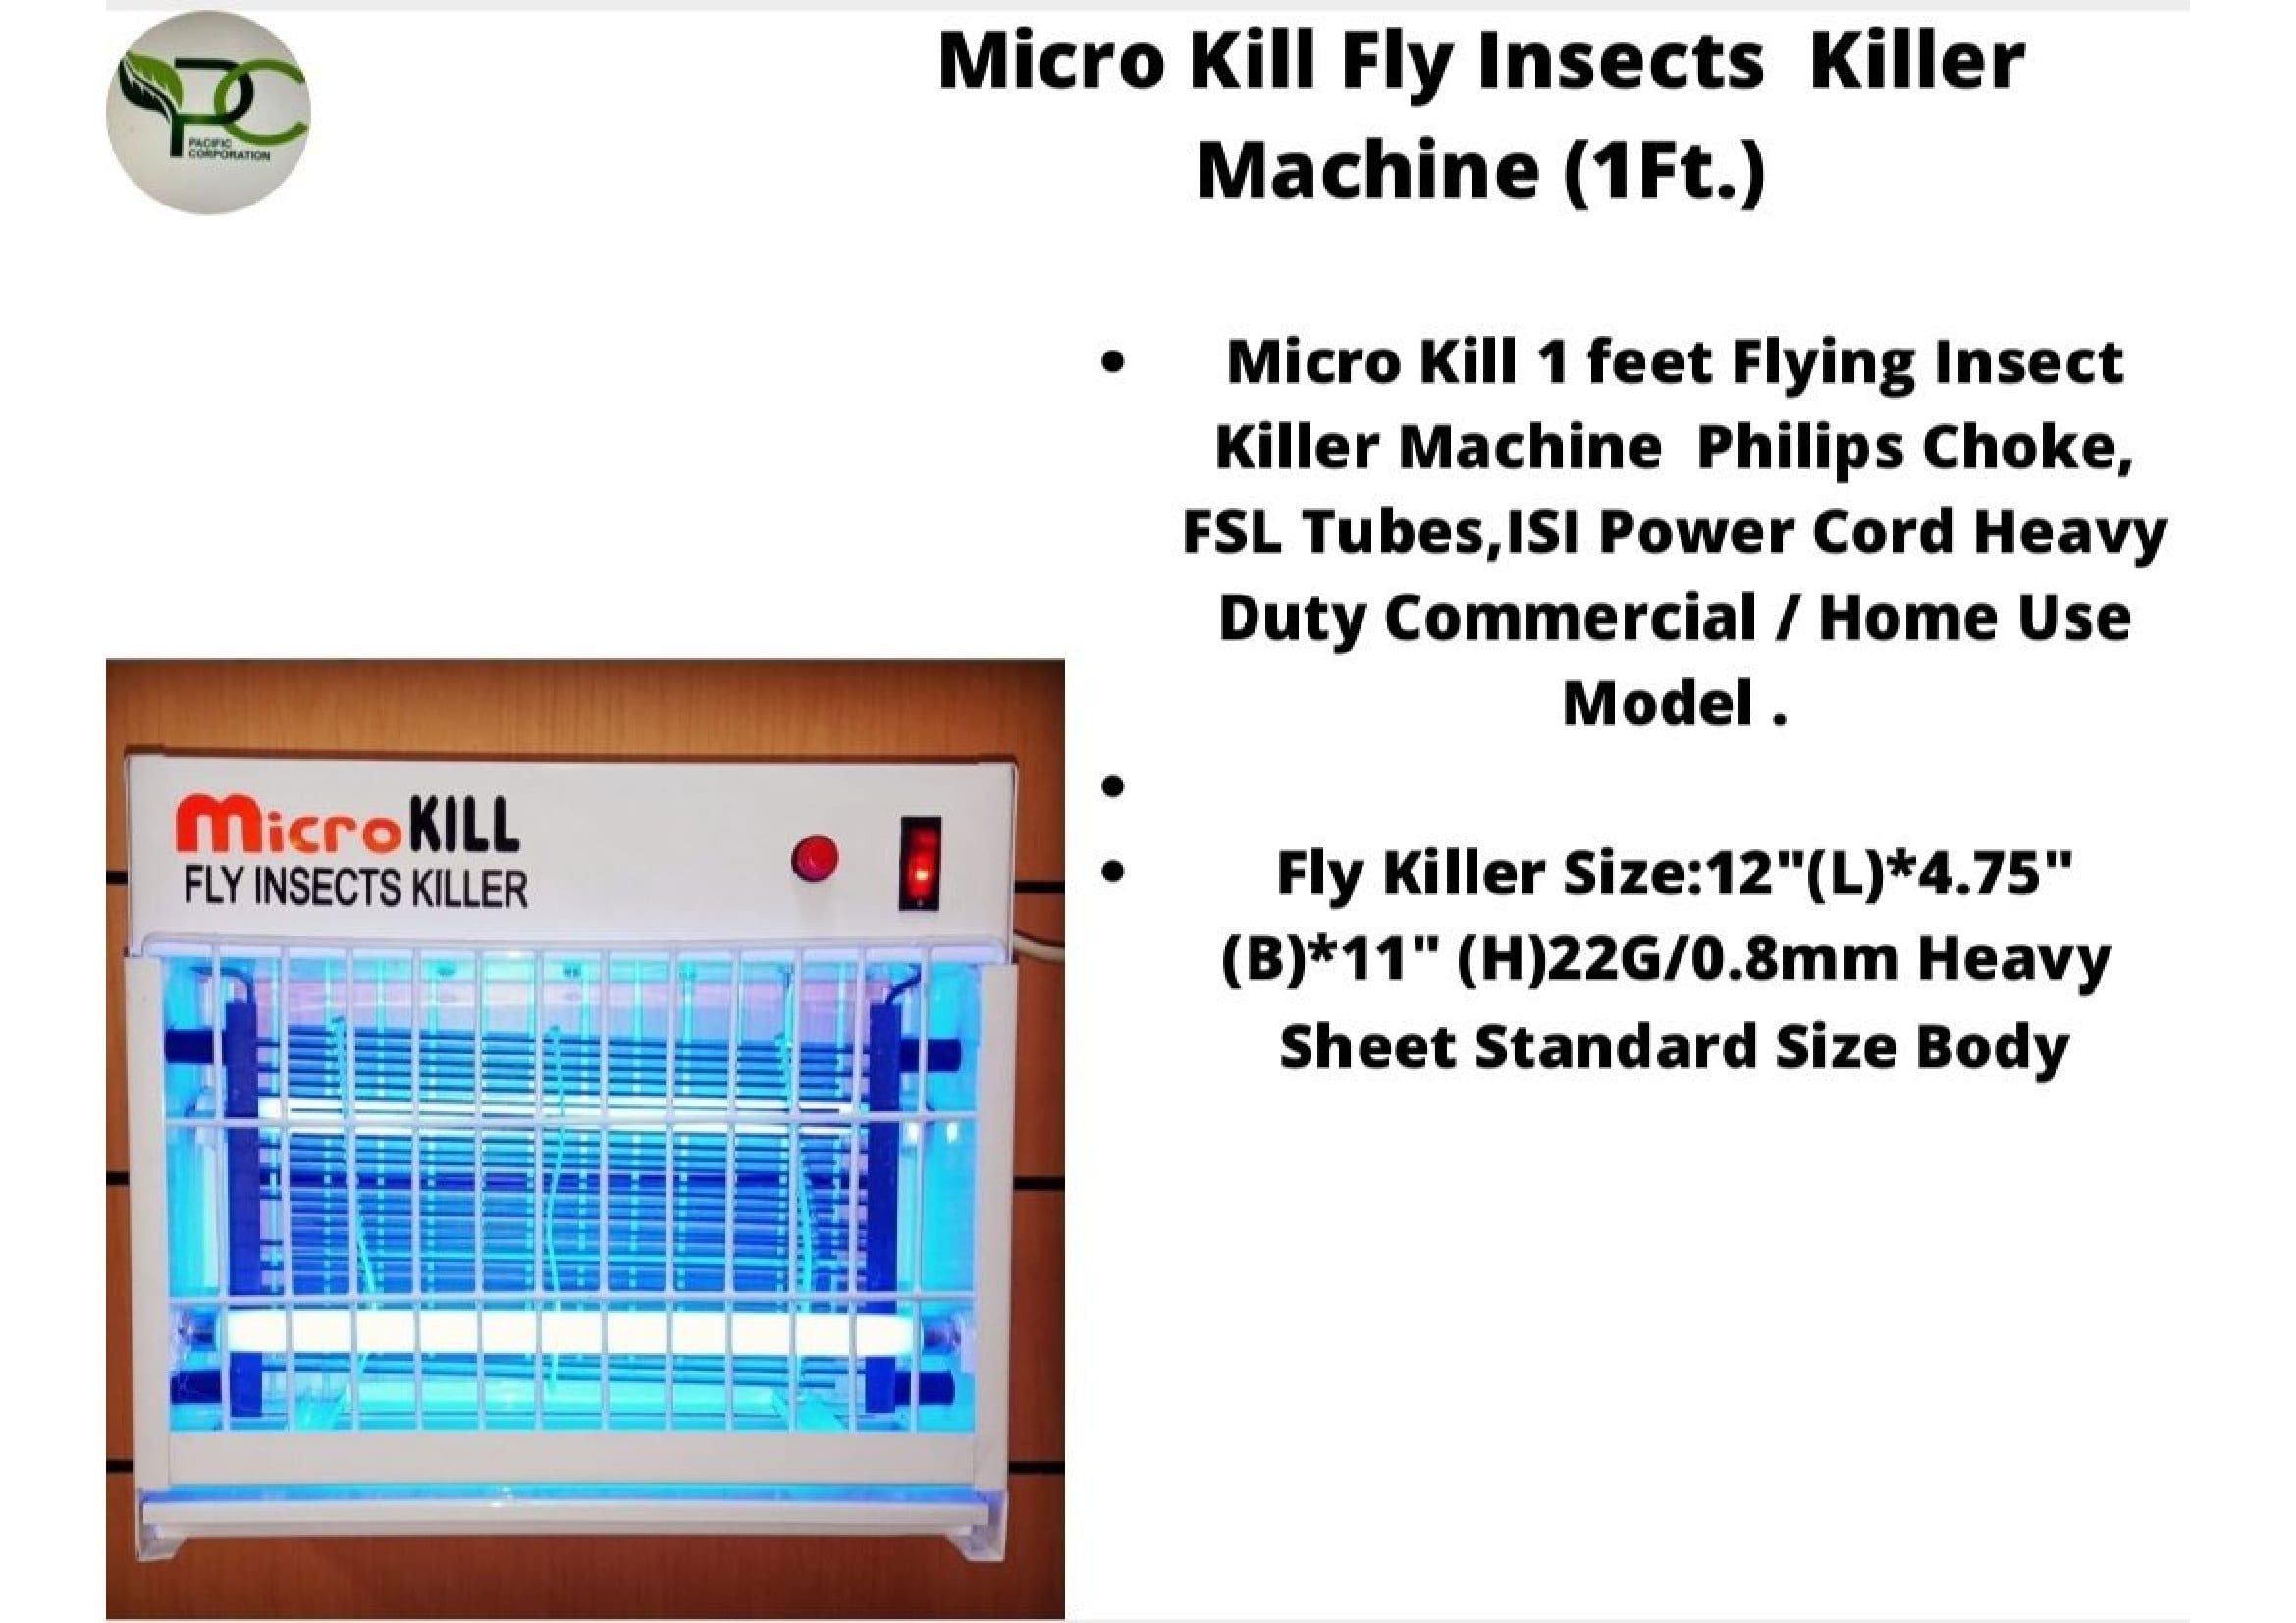 Insect Killer machine - 1 feet